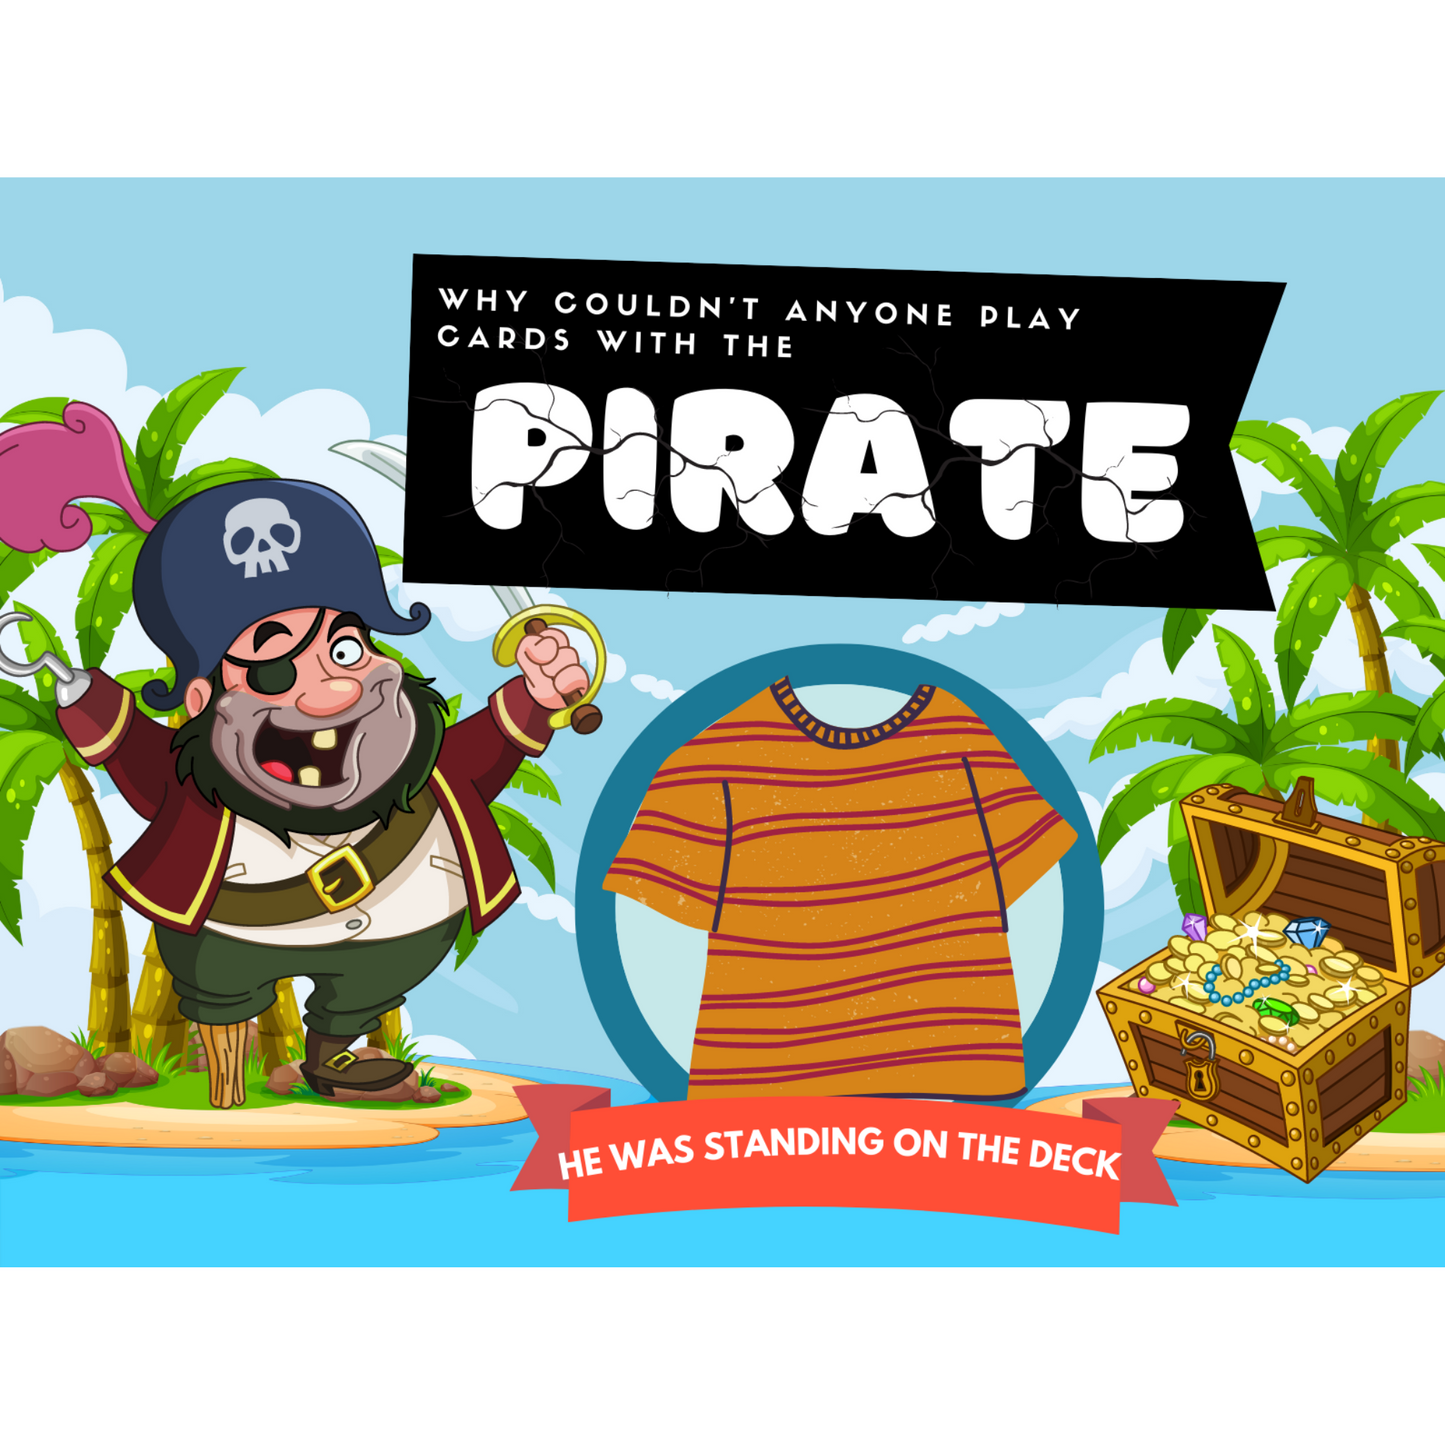 Talk Like a Pirate Day Treasure Hunt - Print at home or 1-hour photo